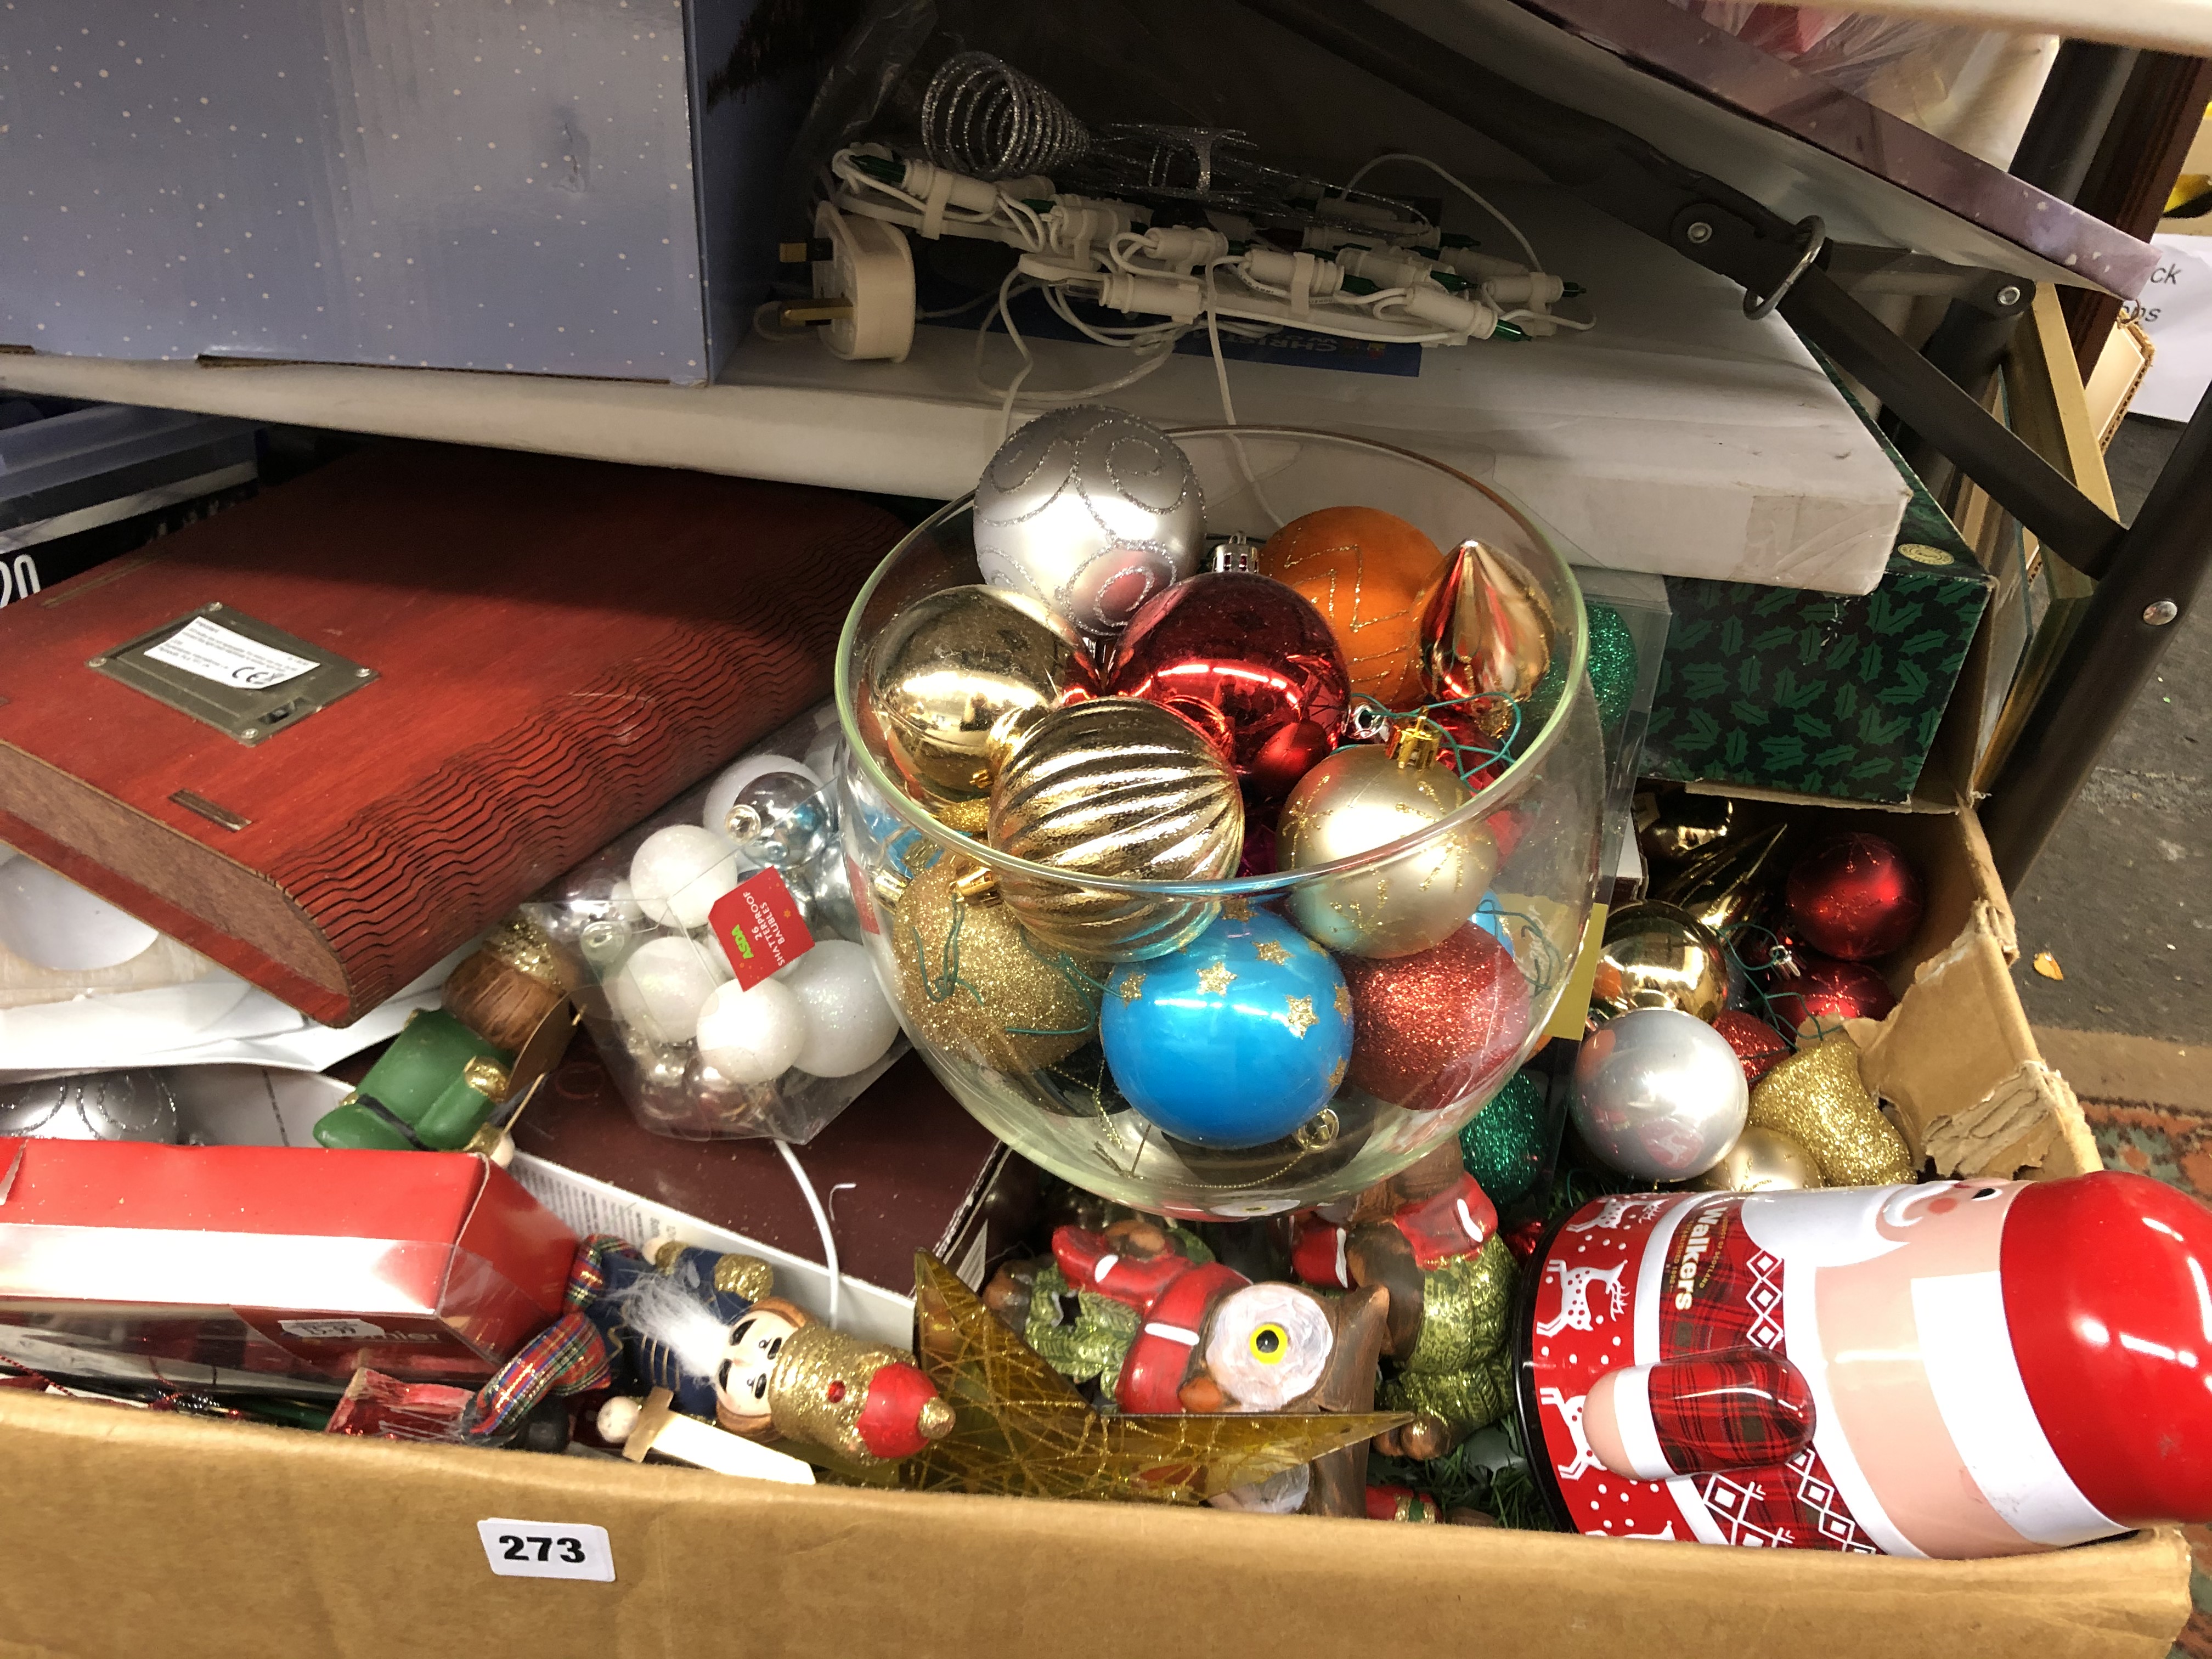 LARGE SELECTION OF CHRISTMAS TREE BAUBLES AND DECORATIONS